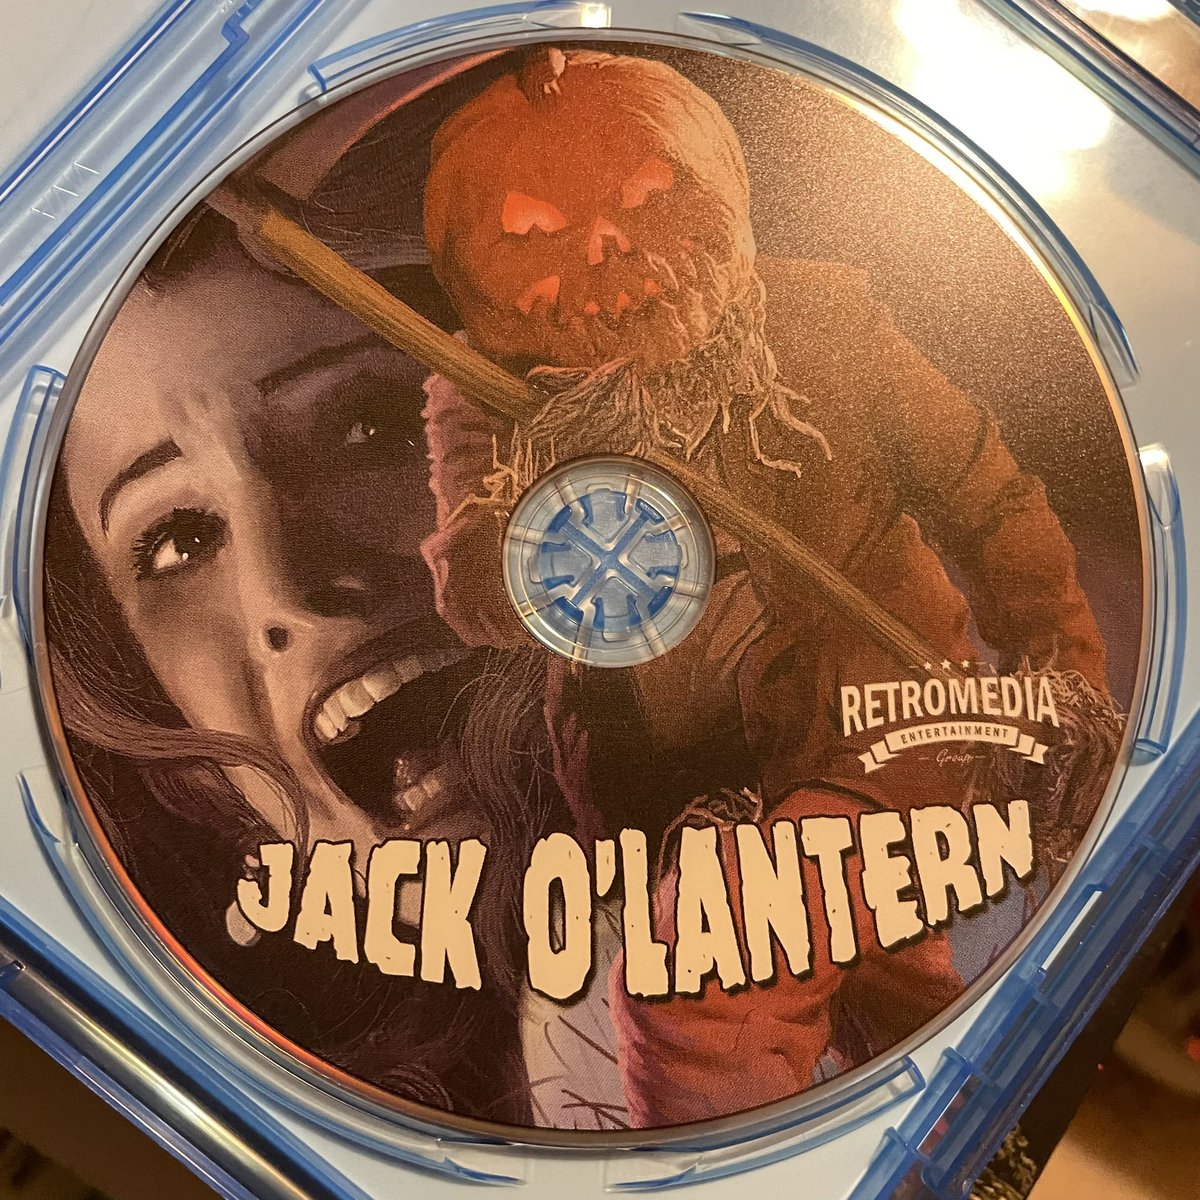 Jack-O aka Blu-ray by Retromedia! It’s a 1995 Slasher film starring Linnea Quigleyl! The main reason I bought this is because of the hilarious commentary exchanges between director and executive producer. Watch the movie first and then watch the movie with commentary. 🤣